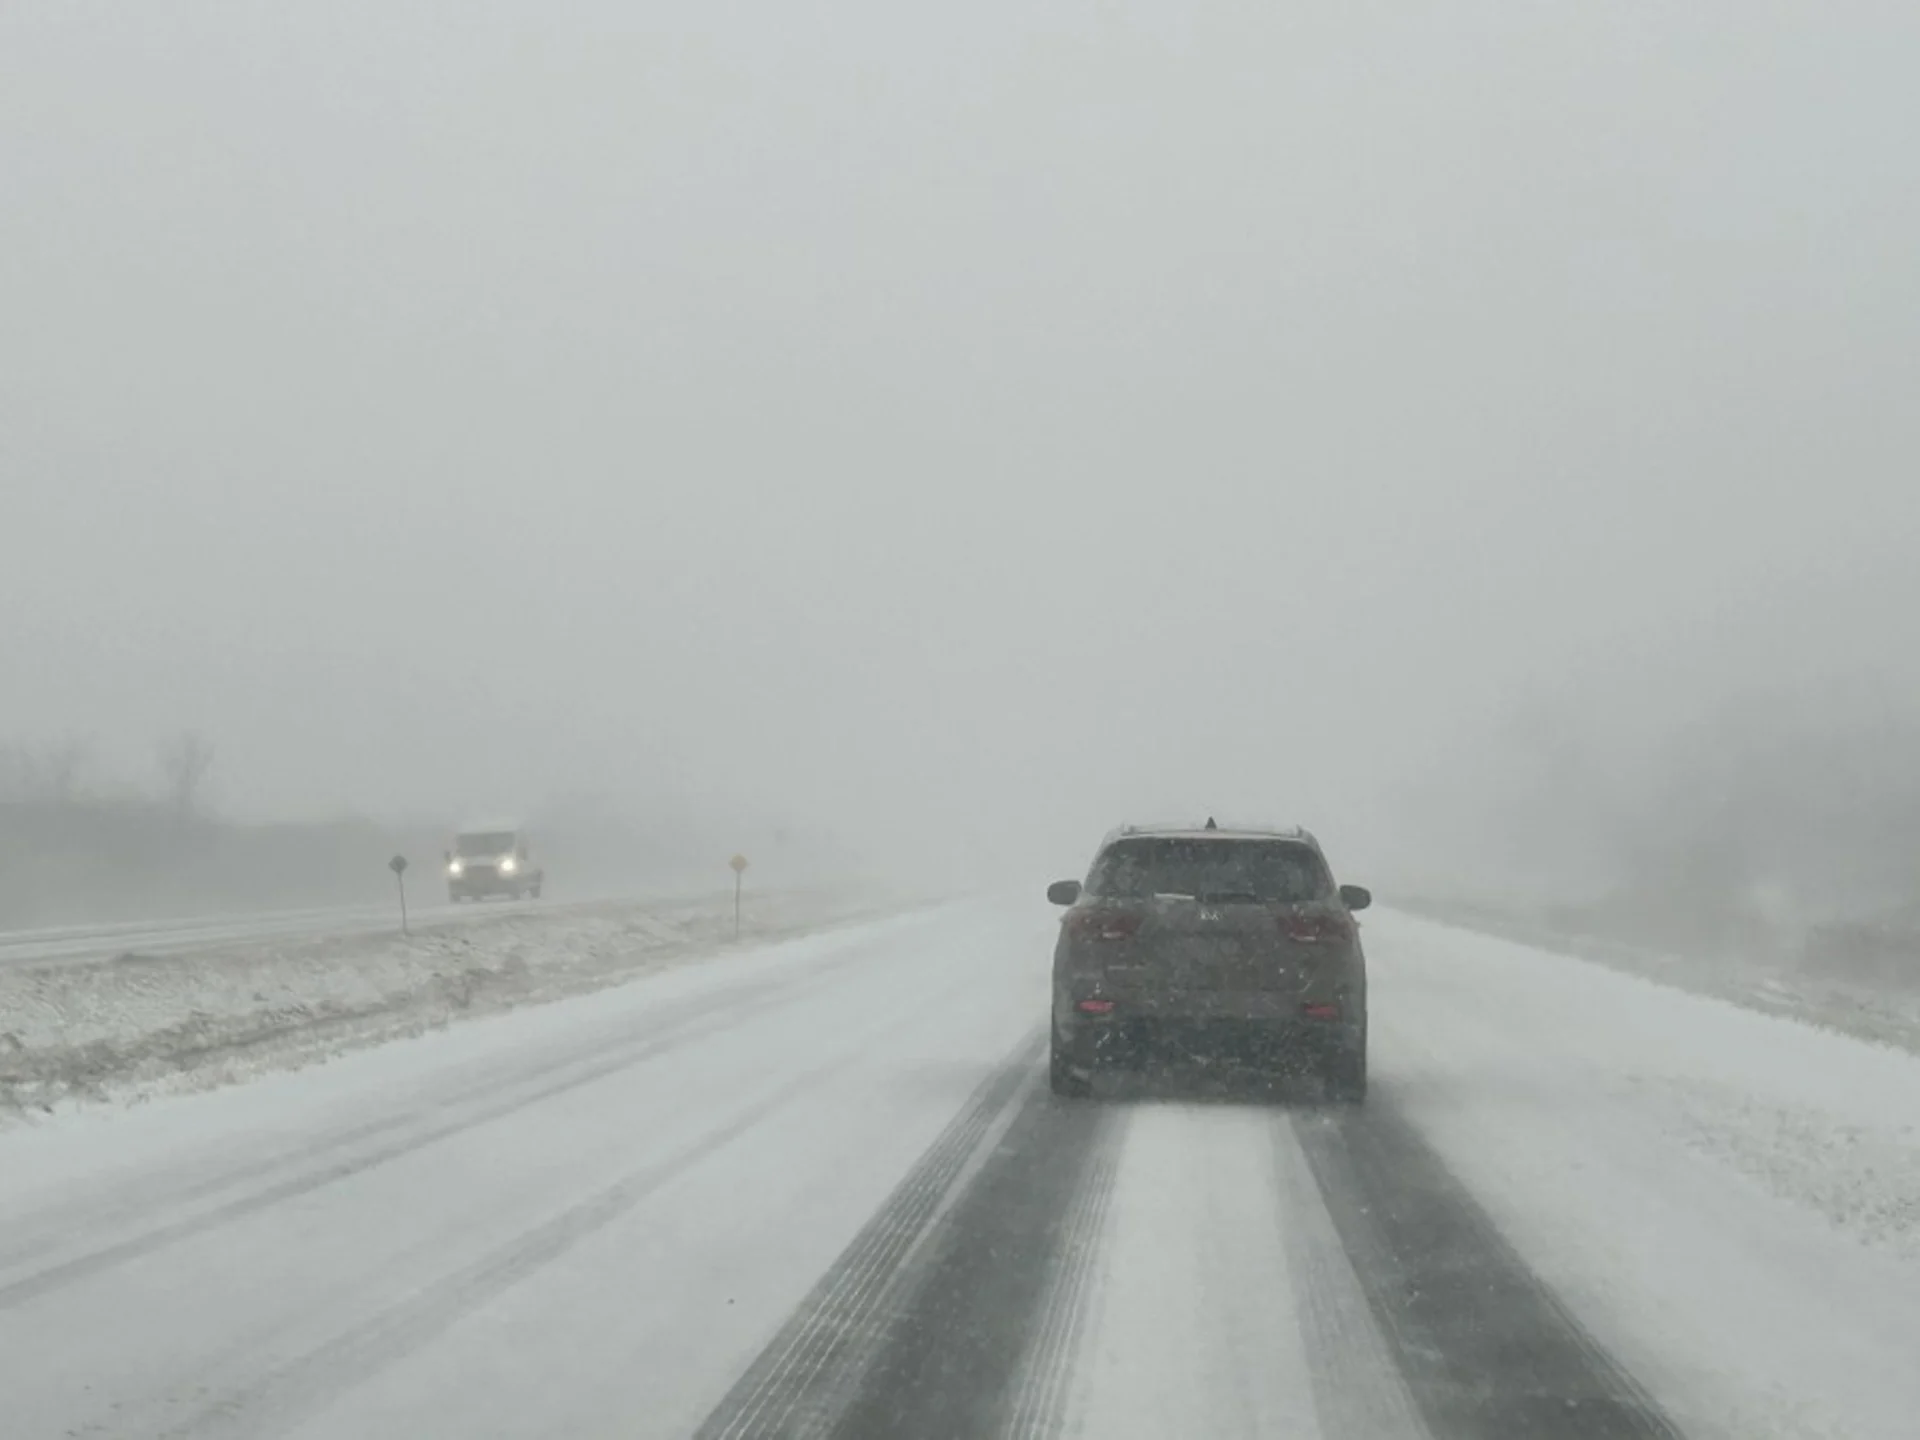 Mark Robinson: Winter driving, whiteout, blowing snow, snowstorm, winter tires